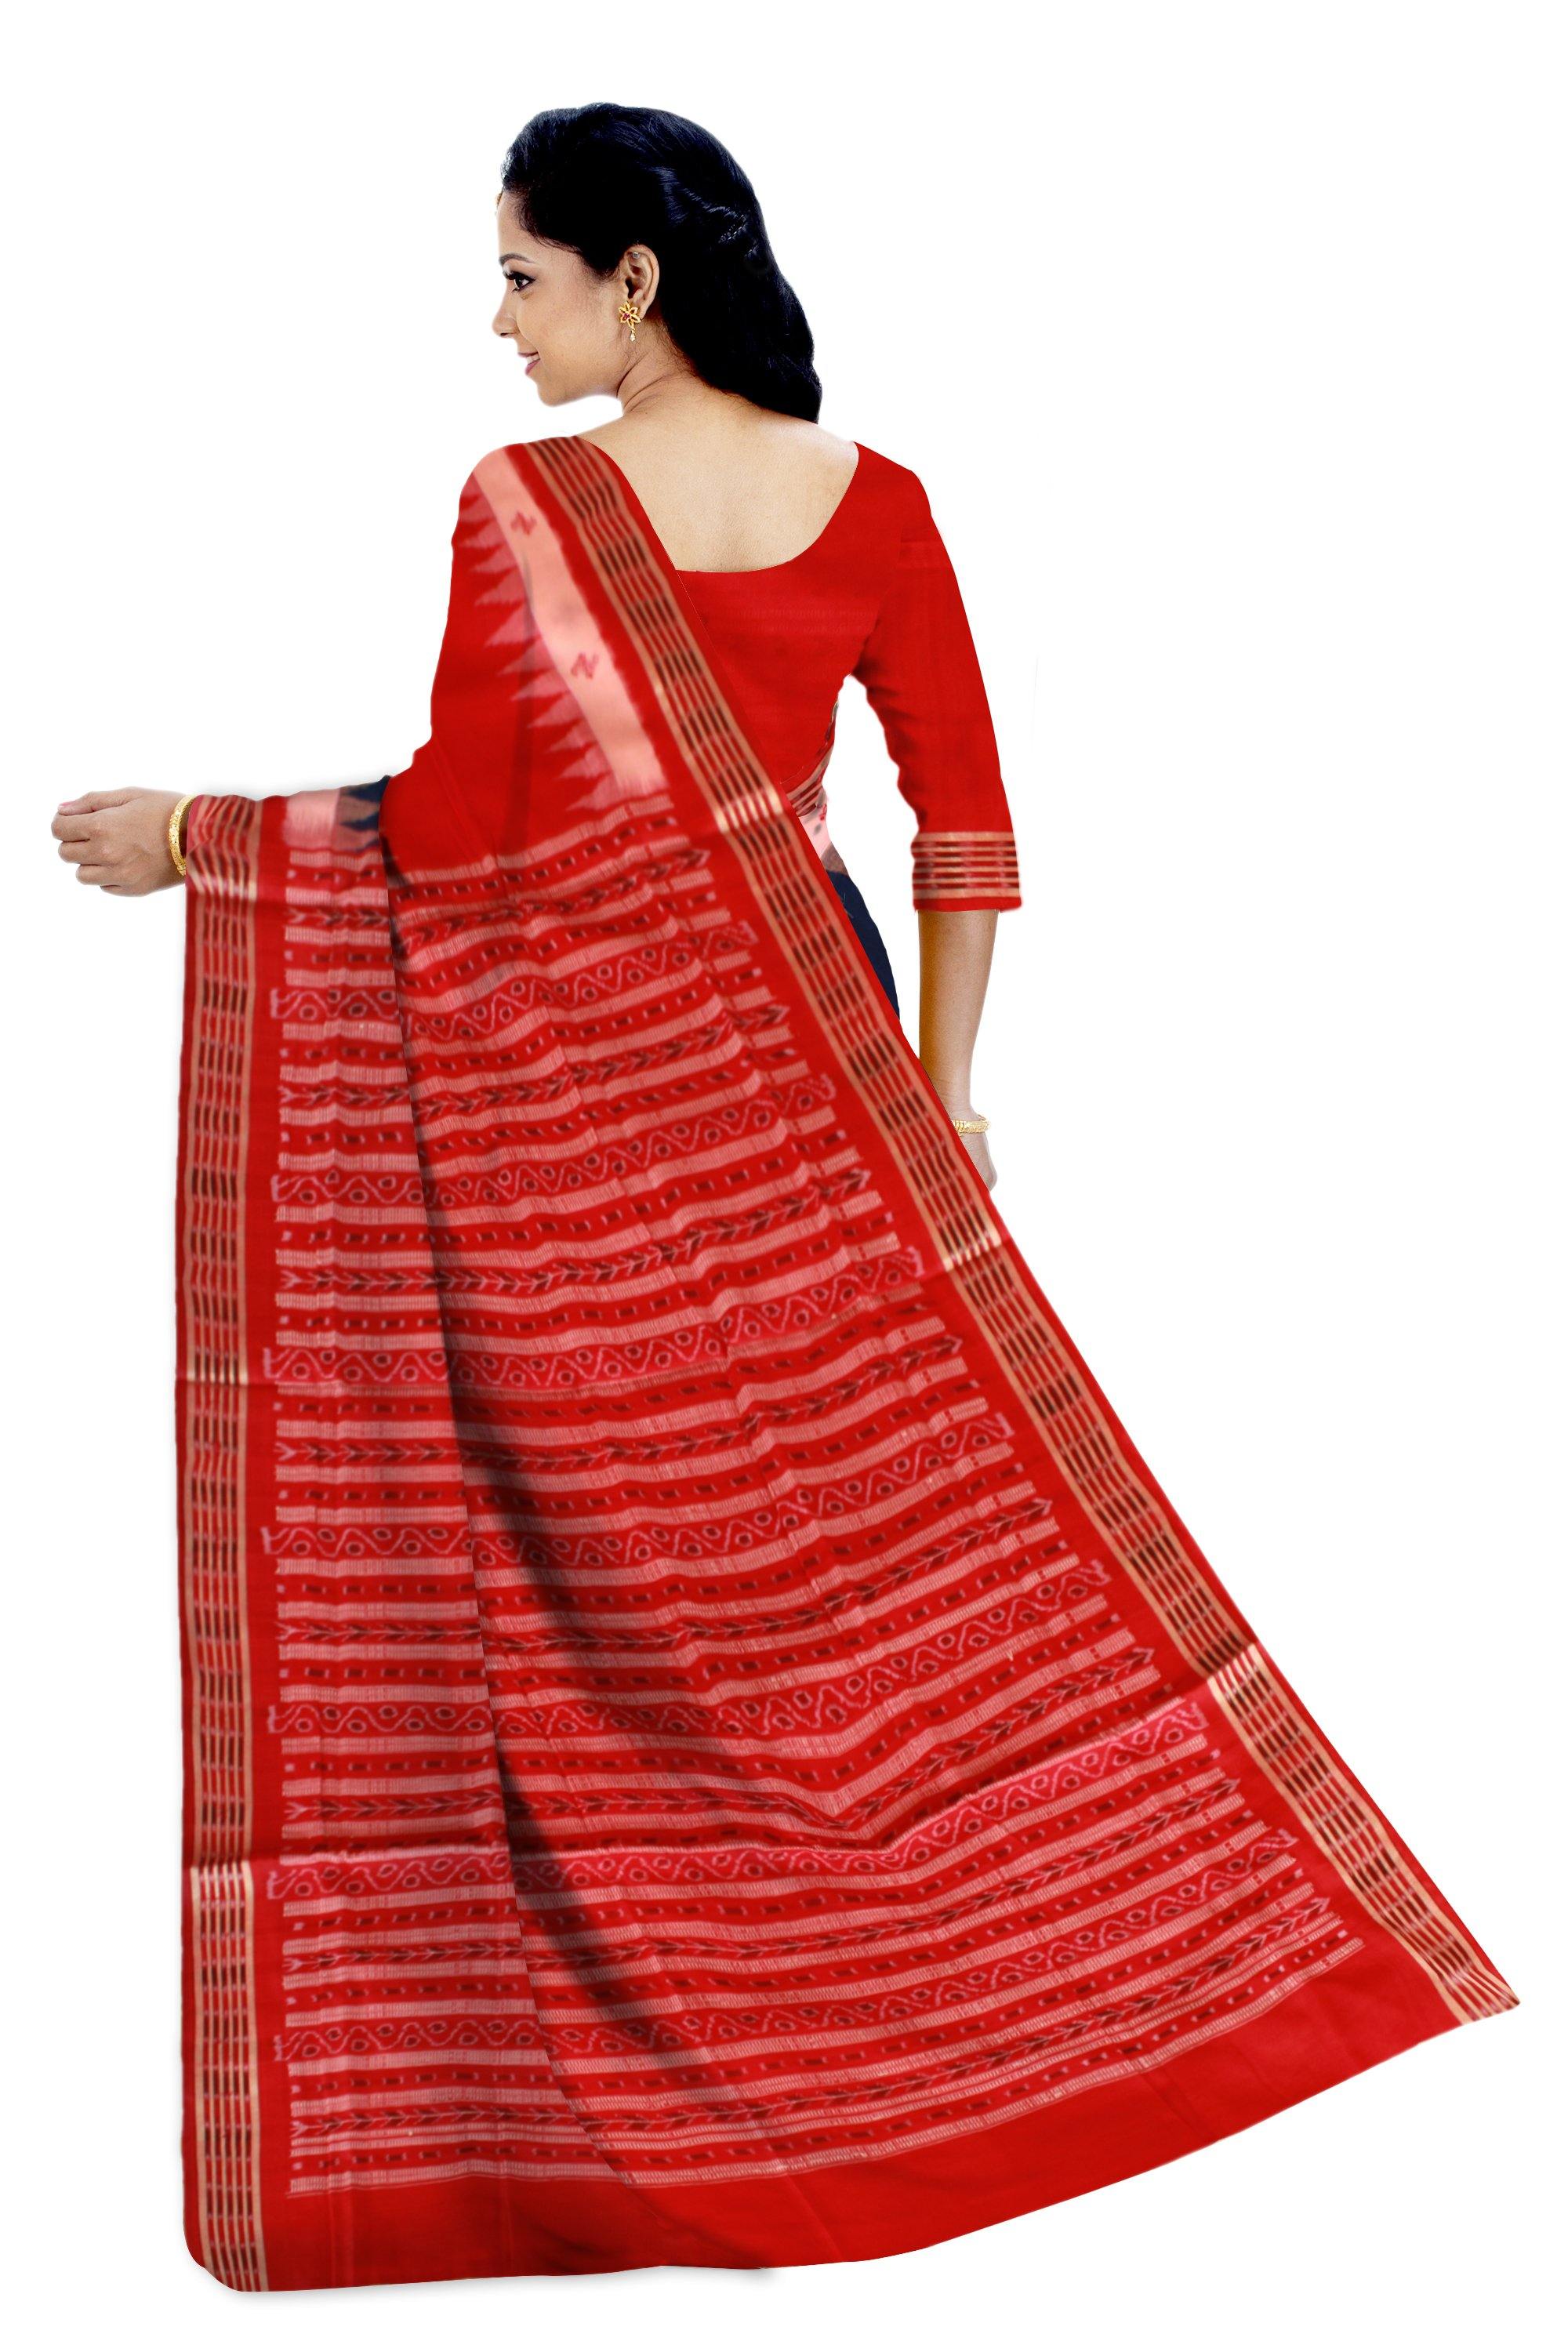 3D design Samablpuri cotton saree in red, pink and blue color. Available with blouse piece. - Koshali Arts & Crafts Enterprise